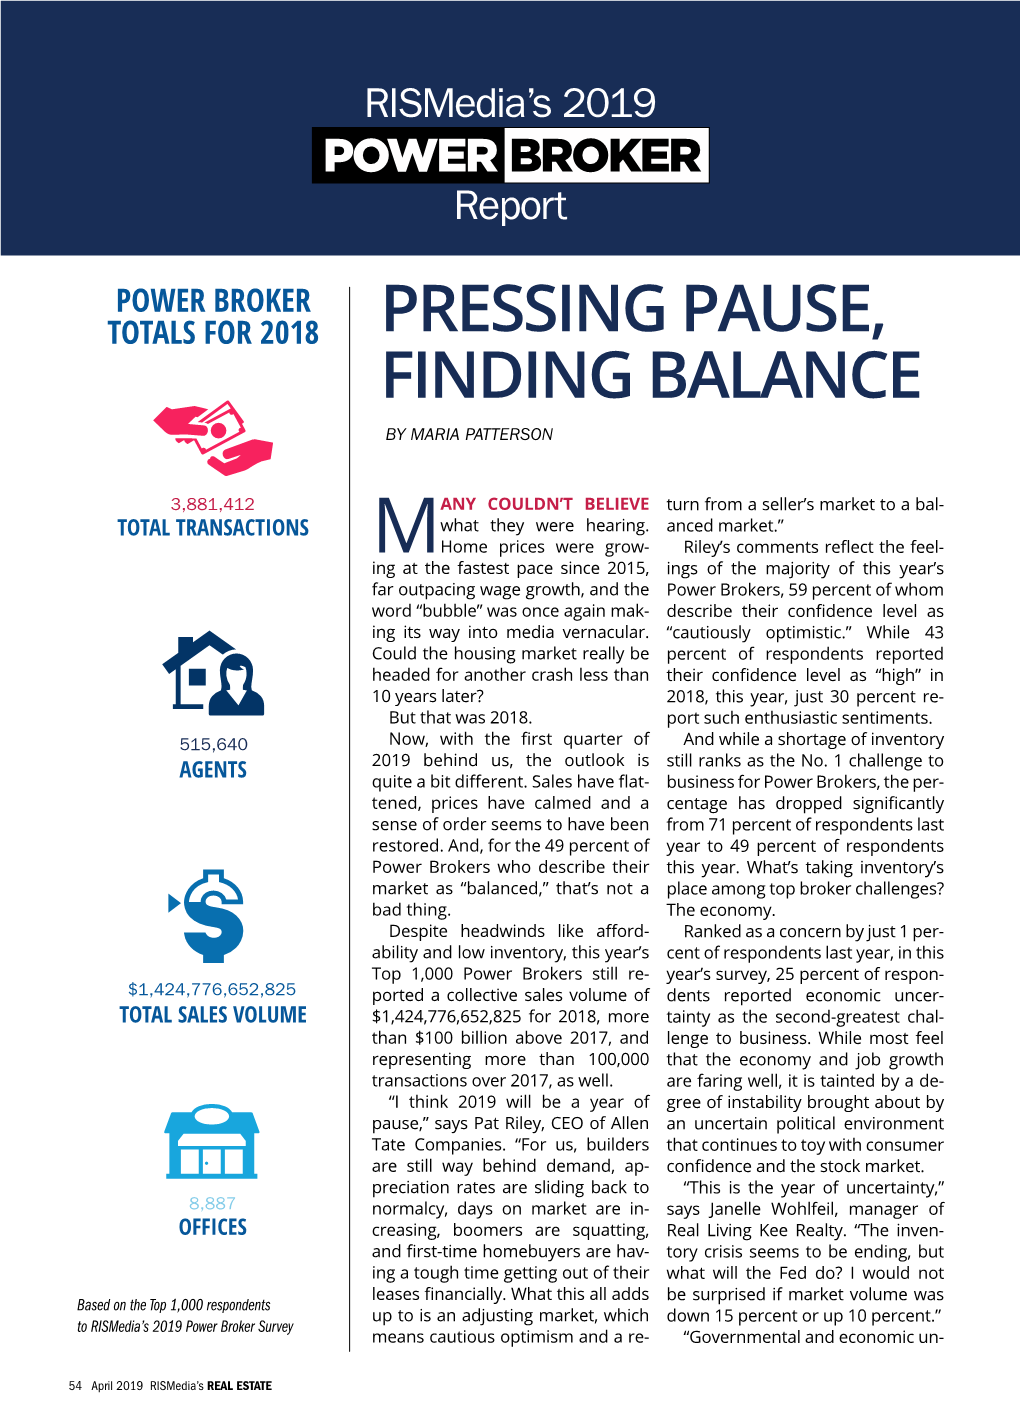 Pressing Pause, Finding Balance by Maria Patterson